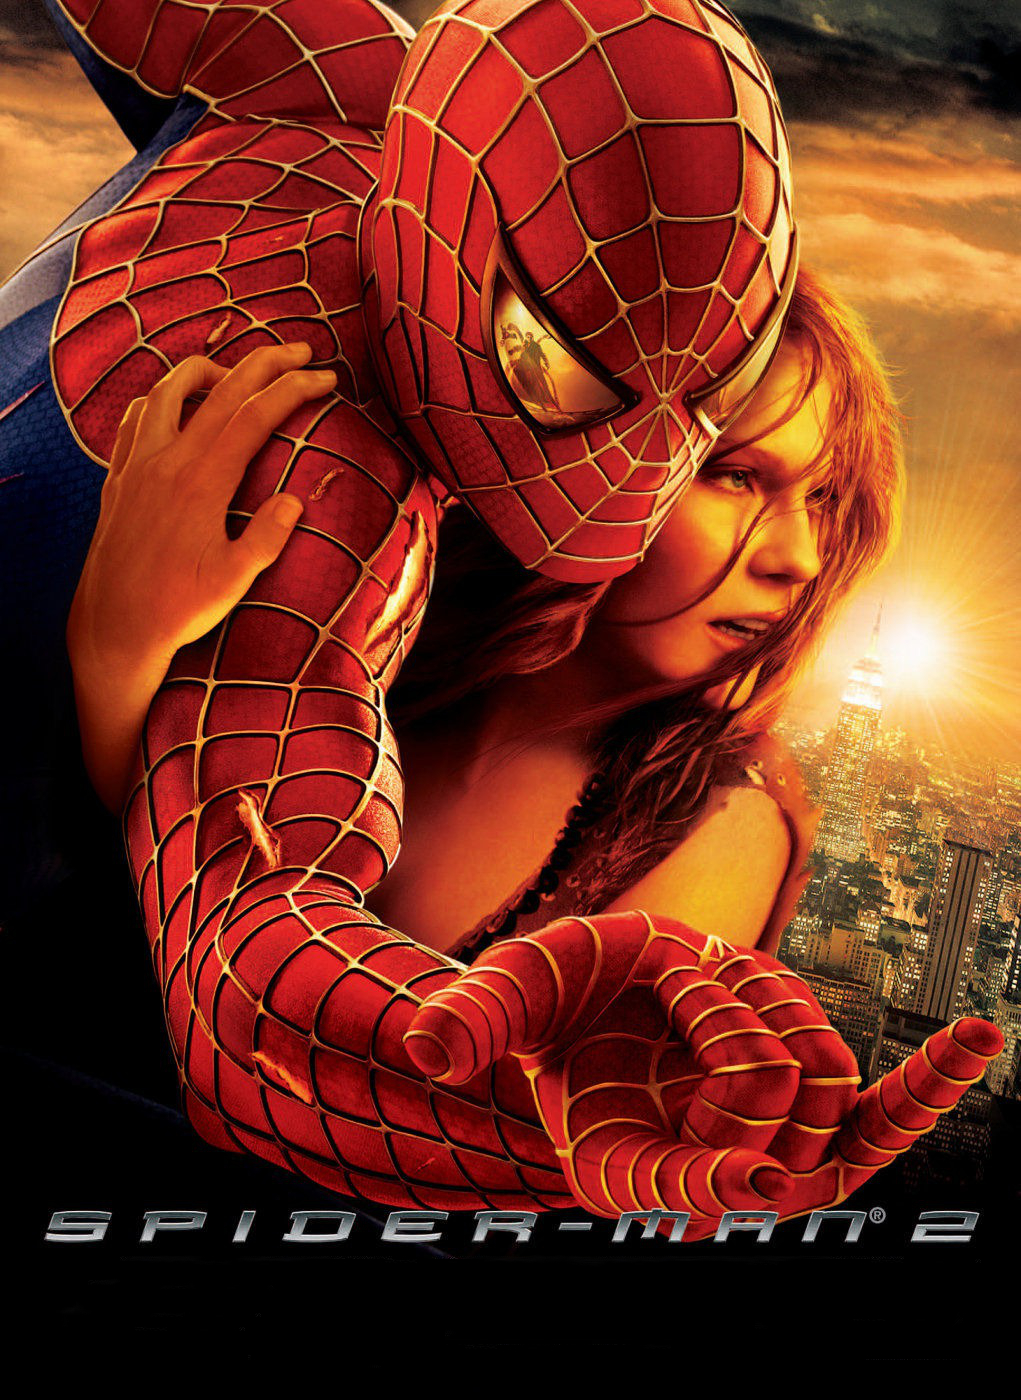 Spider-Man 2 Film Review